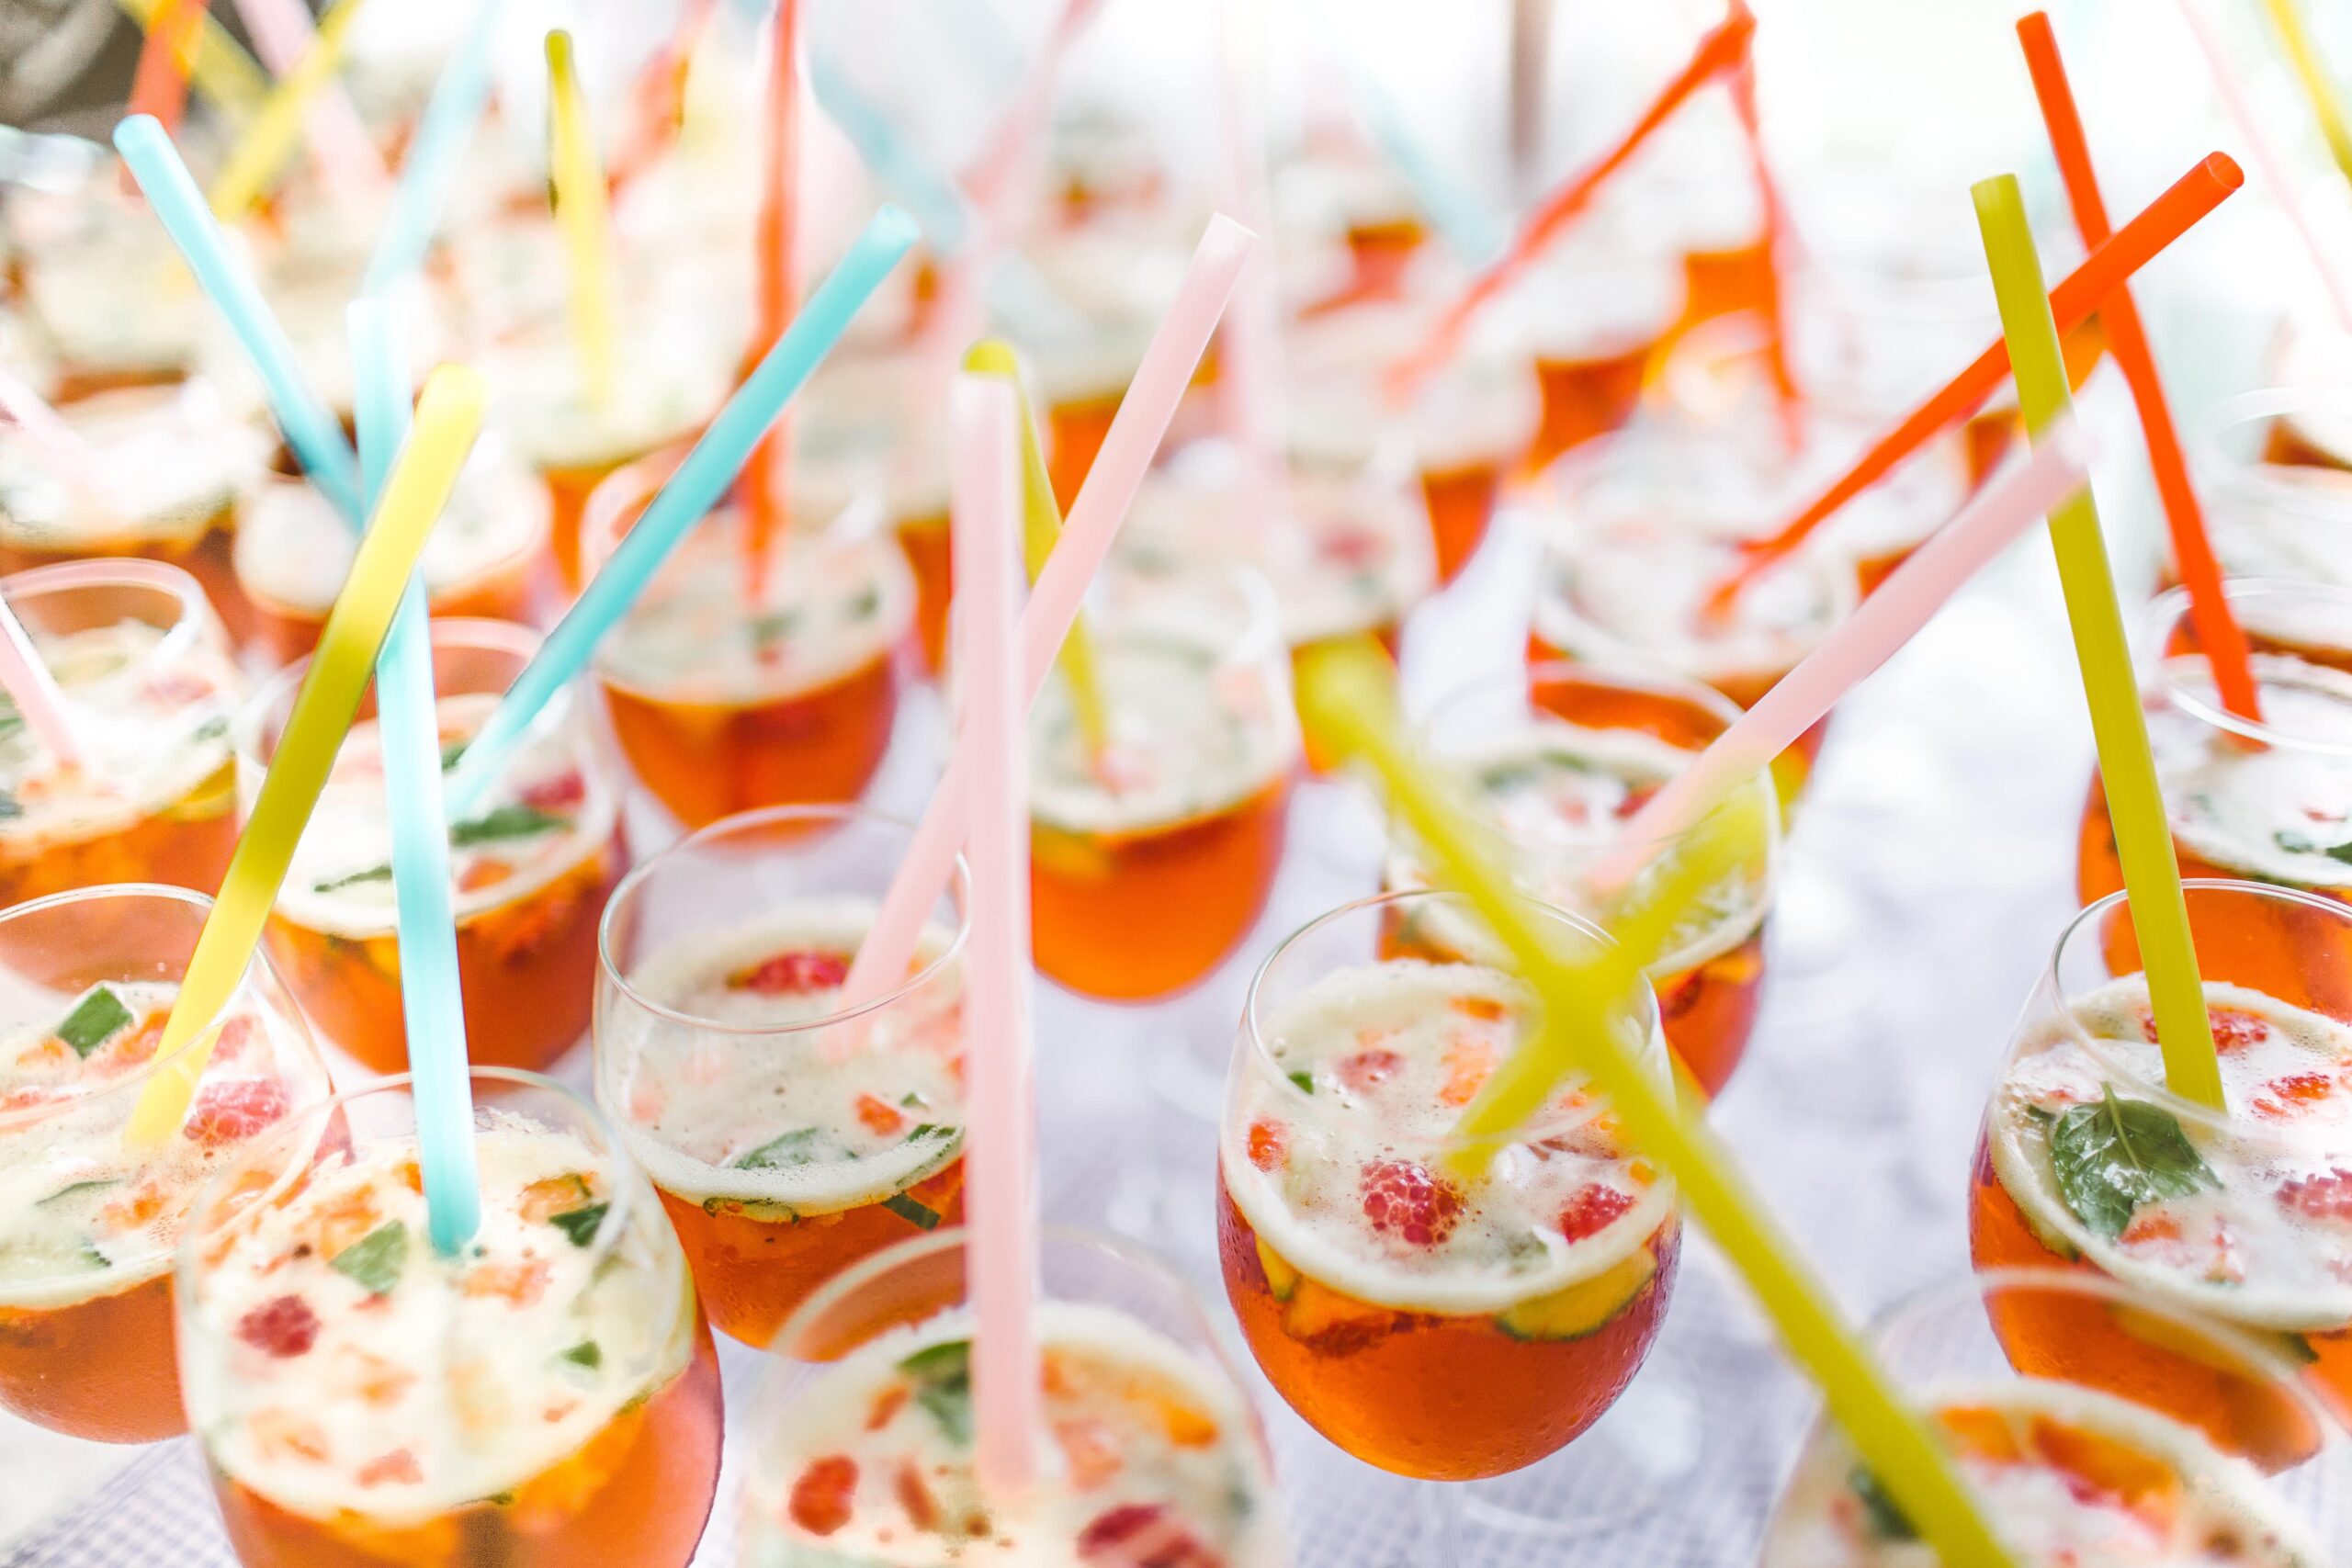 Best Non-Alcoholic Beverages for a Wedding Reception: Delicious and Inclusive Options